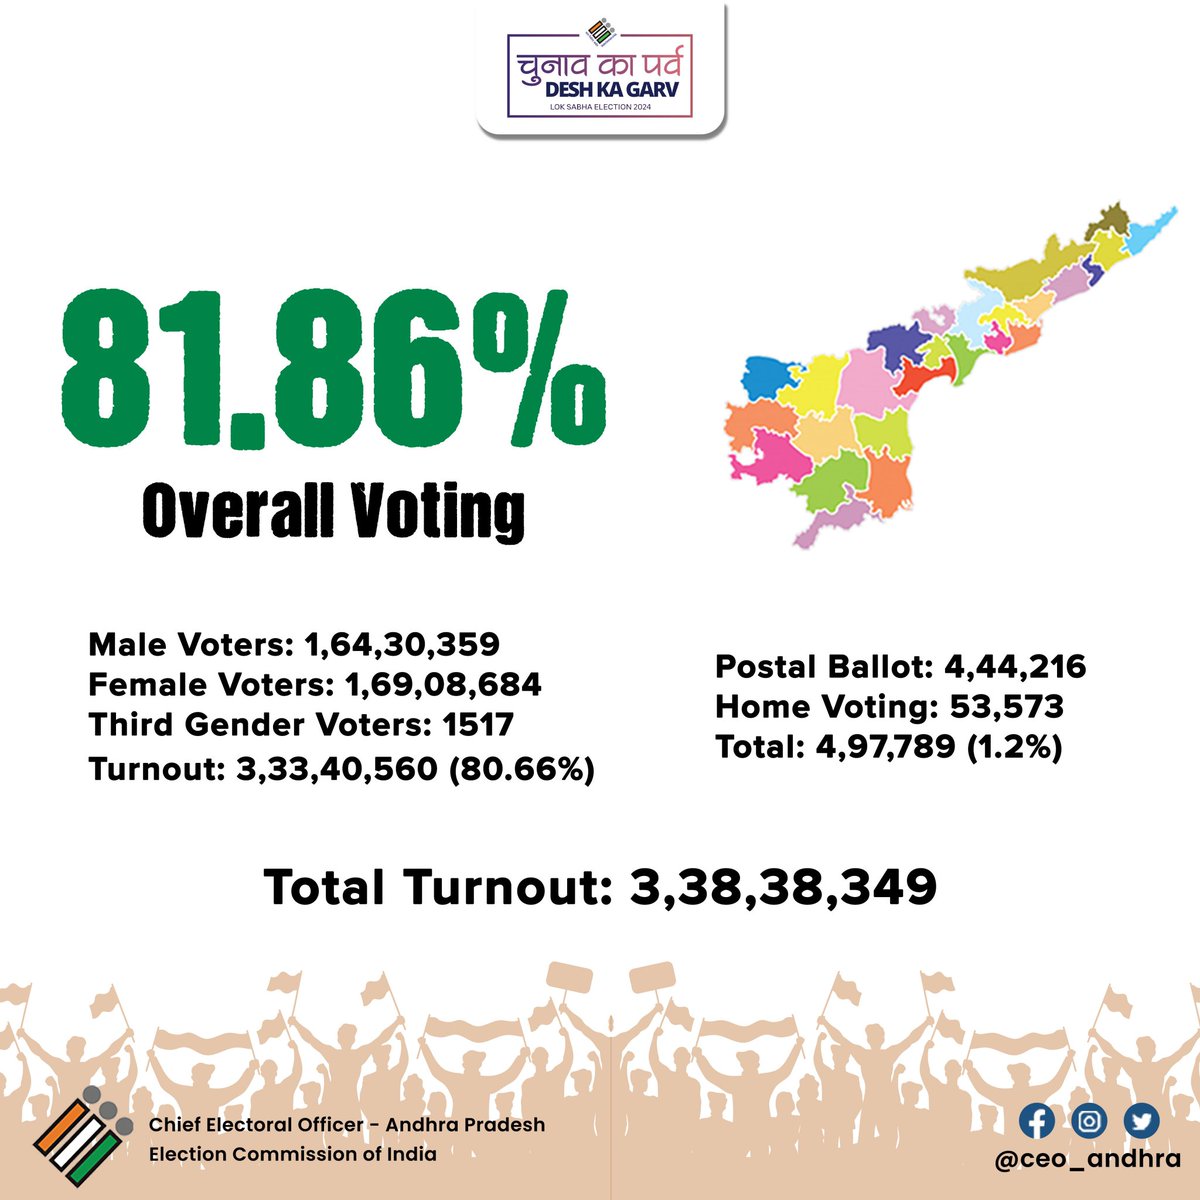 #AndhraPradesh: Andhra Pradesh records the highest voter turnout of 80.86%, with 3.38 crore voters, among the four phases of polling concluded so far in the 2024 General Elections. - Male voters: 1.64 crore - Female voters: 1.69 crore - Third gender voters: 1,517